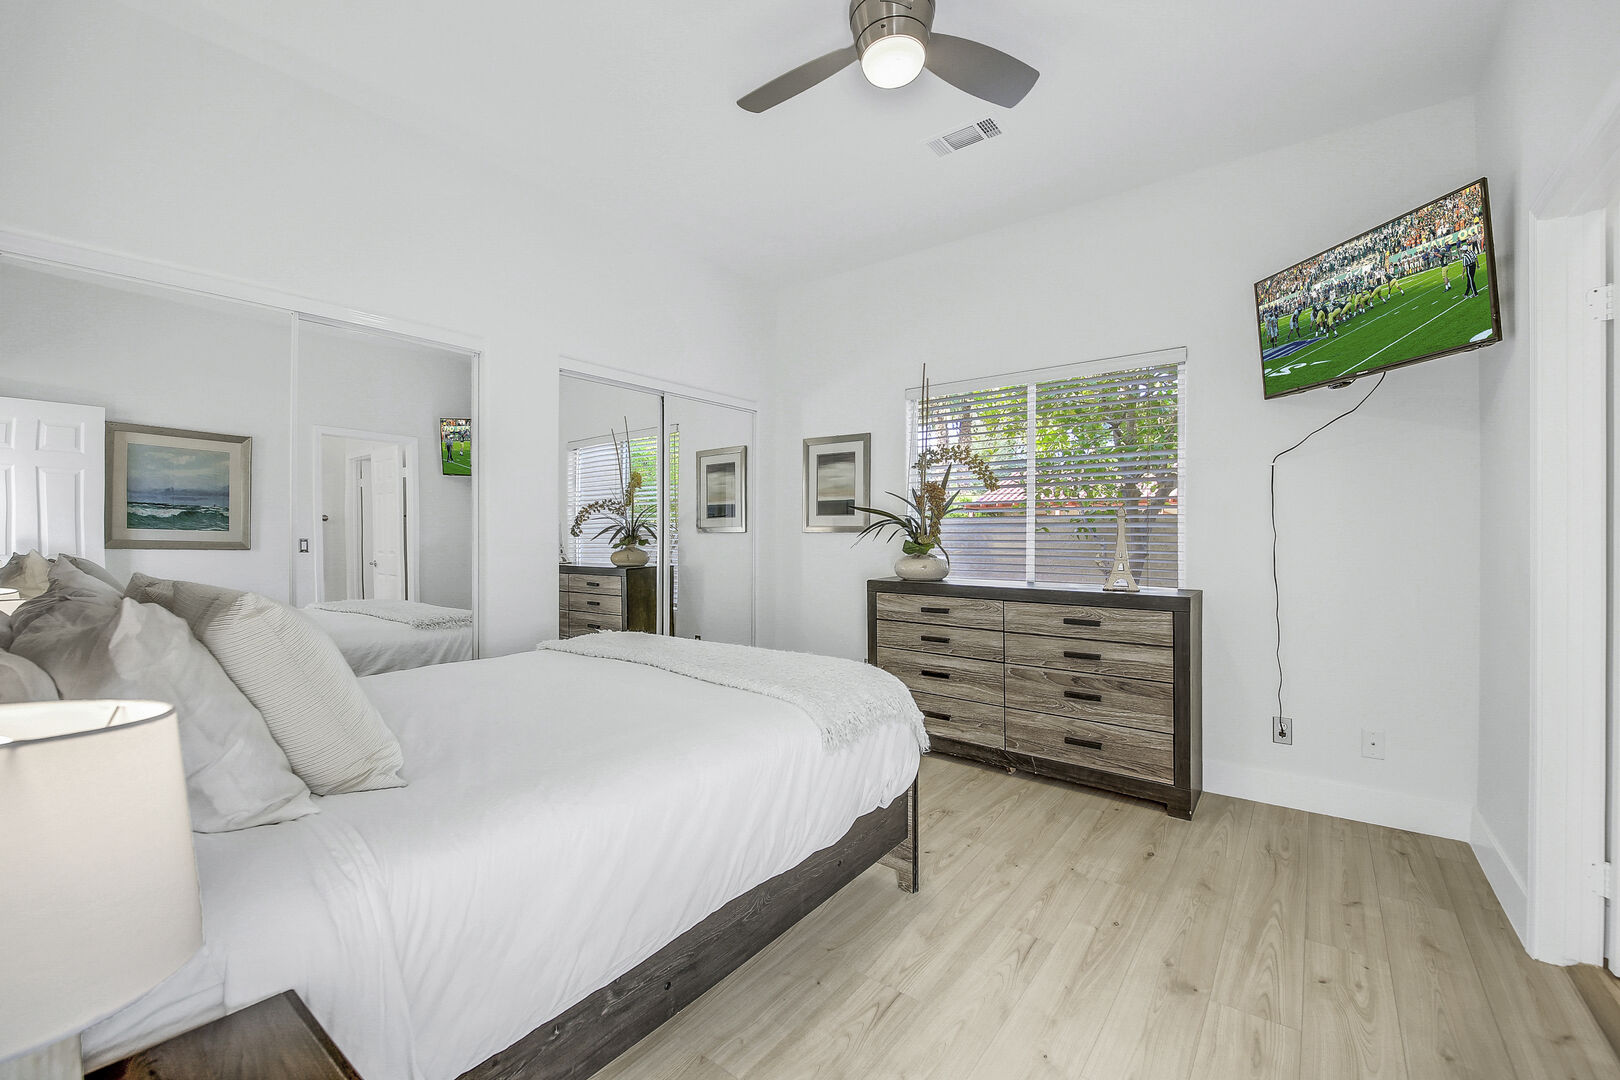 Bedroom 3 features a 30-inch Samsung Smart television, remote-controlled ceiling fan and reach-in closet.